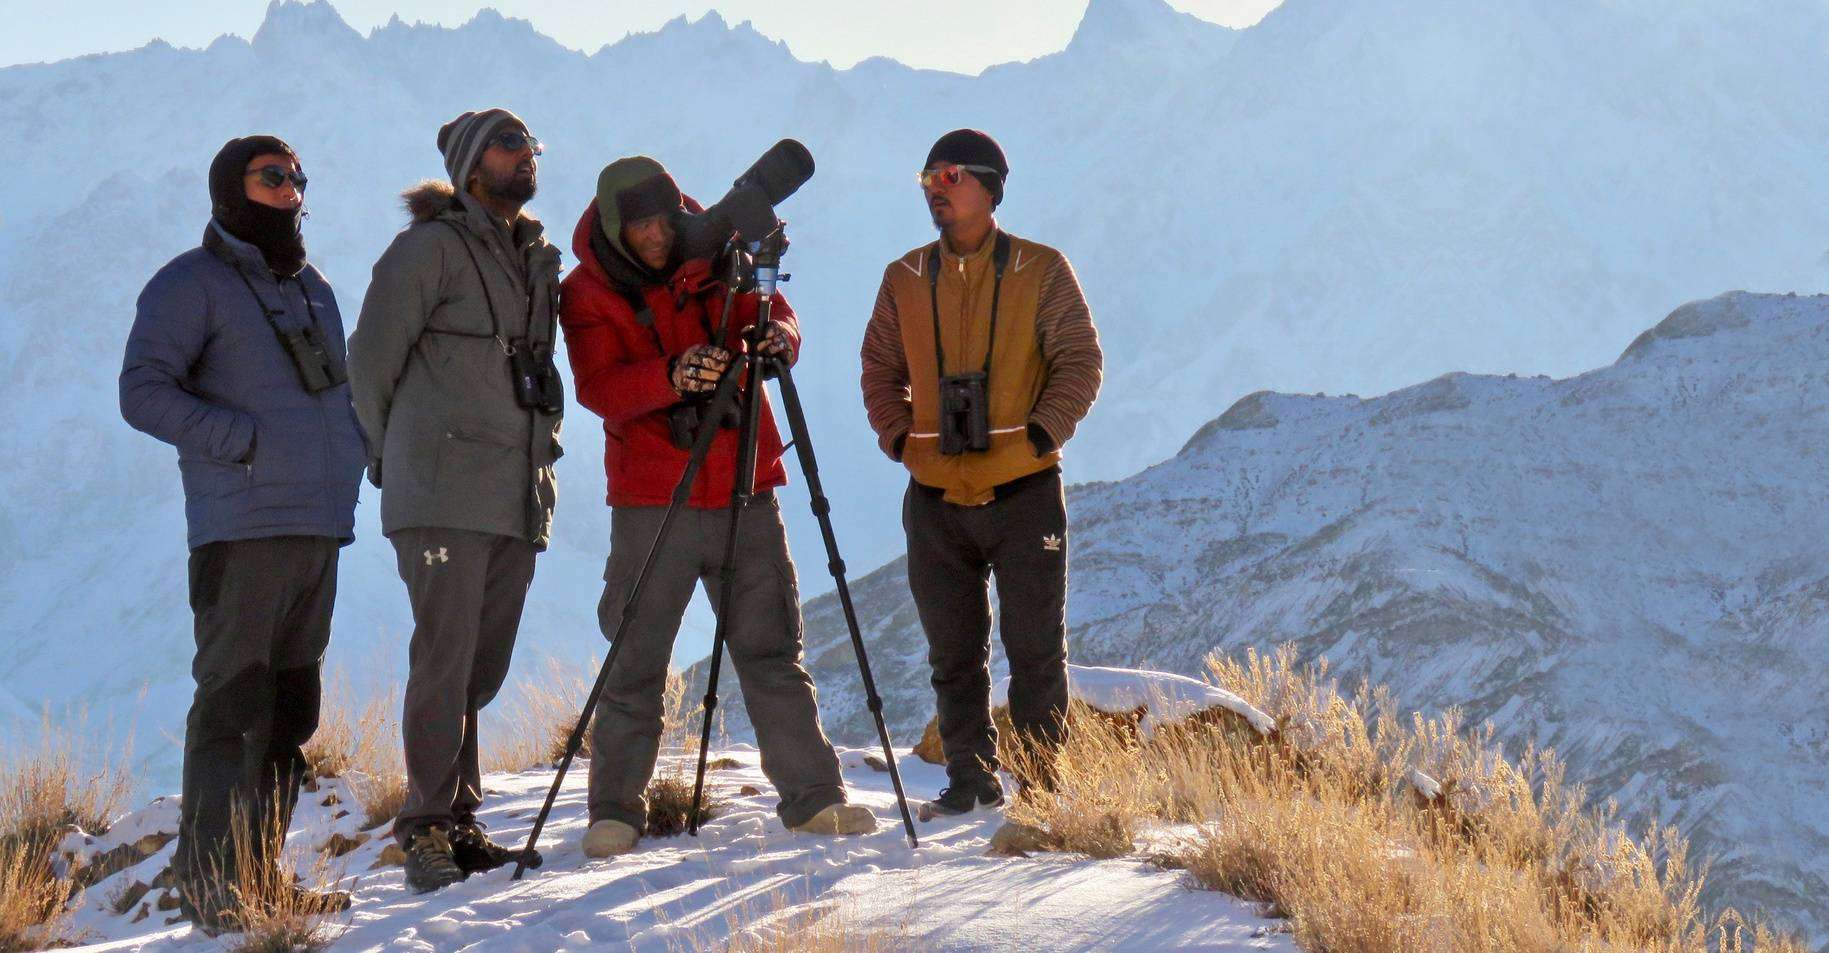 Photographers in the snow leopards habitat in the Himalayas